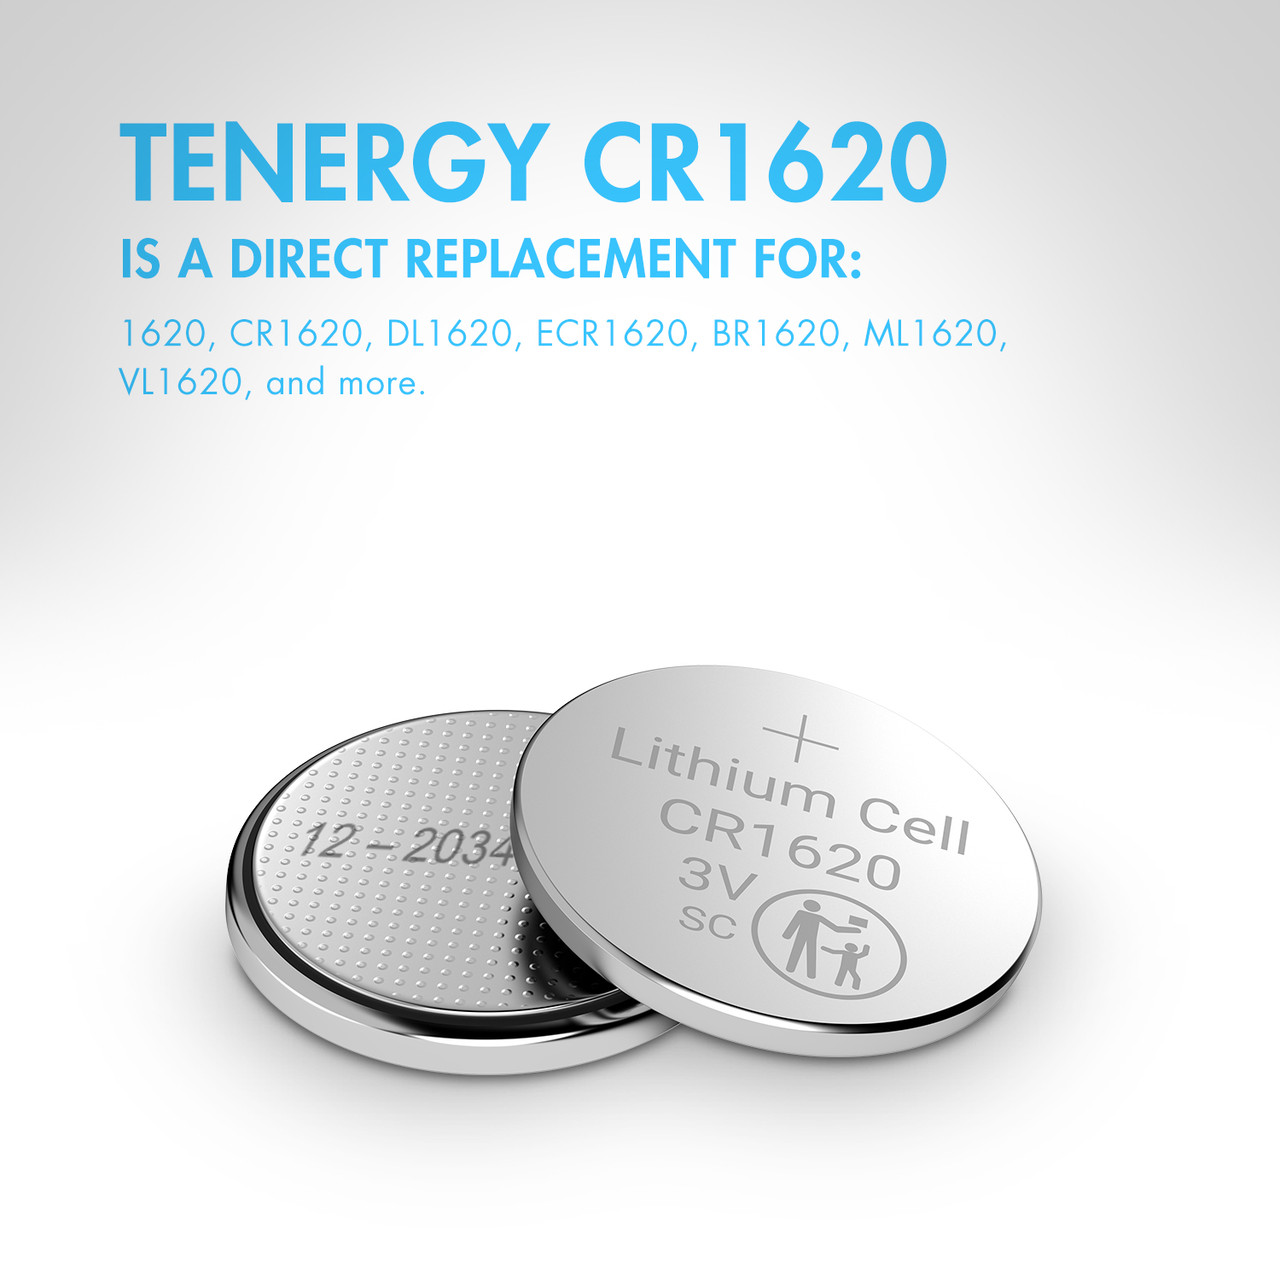 Tenergy Cr1620 3V Lithium Button Cells 5 Pack (1 Card) 40062